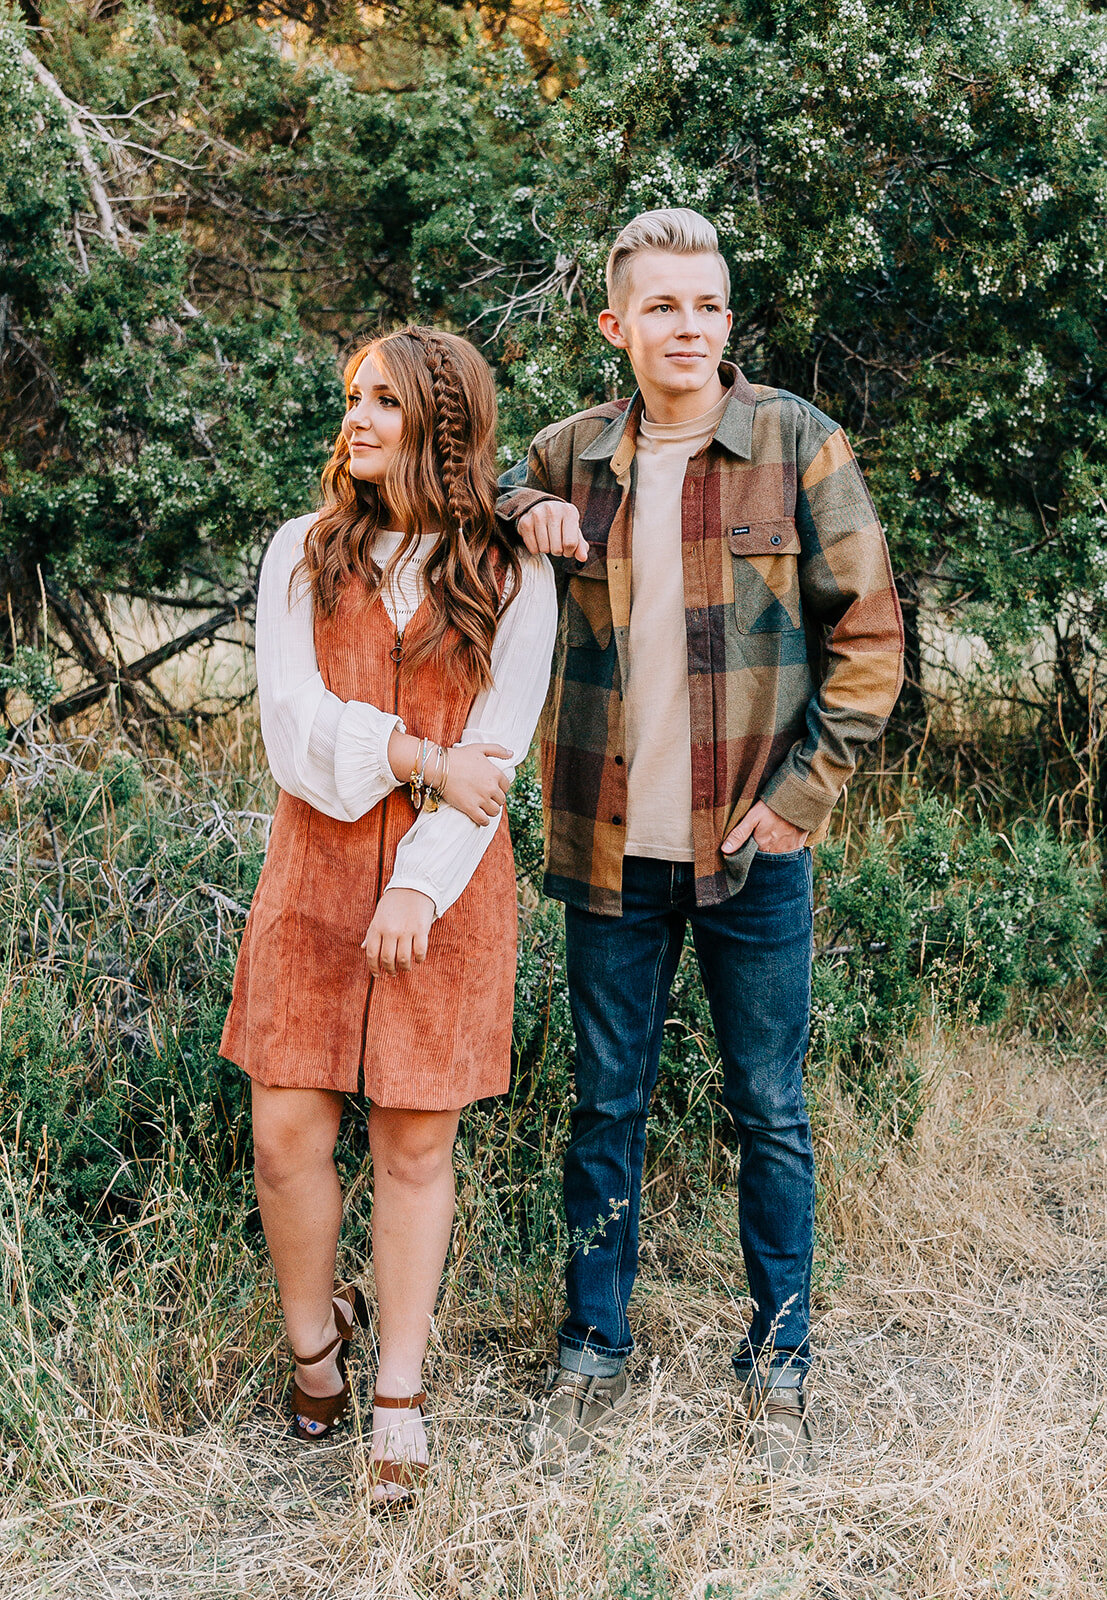  outfit inspiration for fall family photos commercial photography of new fashion pieces fall inventory online clothing boutique the classic shop in tremonton utah brown and gold colors fall fashion men’s plaid button-up with jeans white long sleeves 